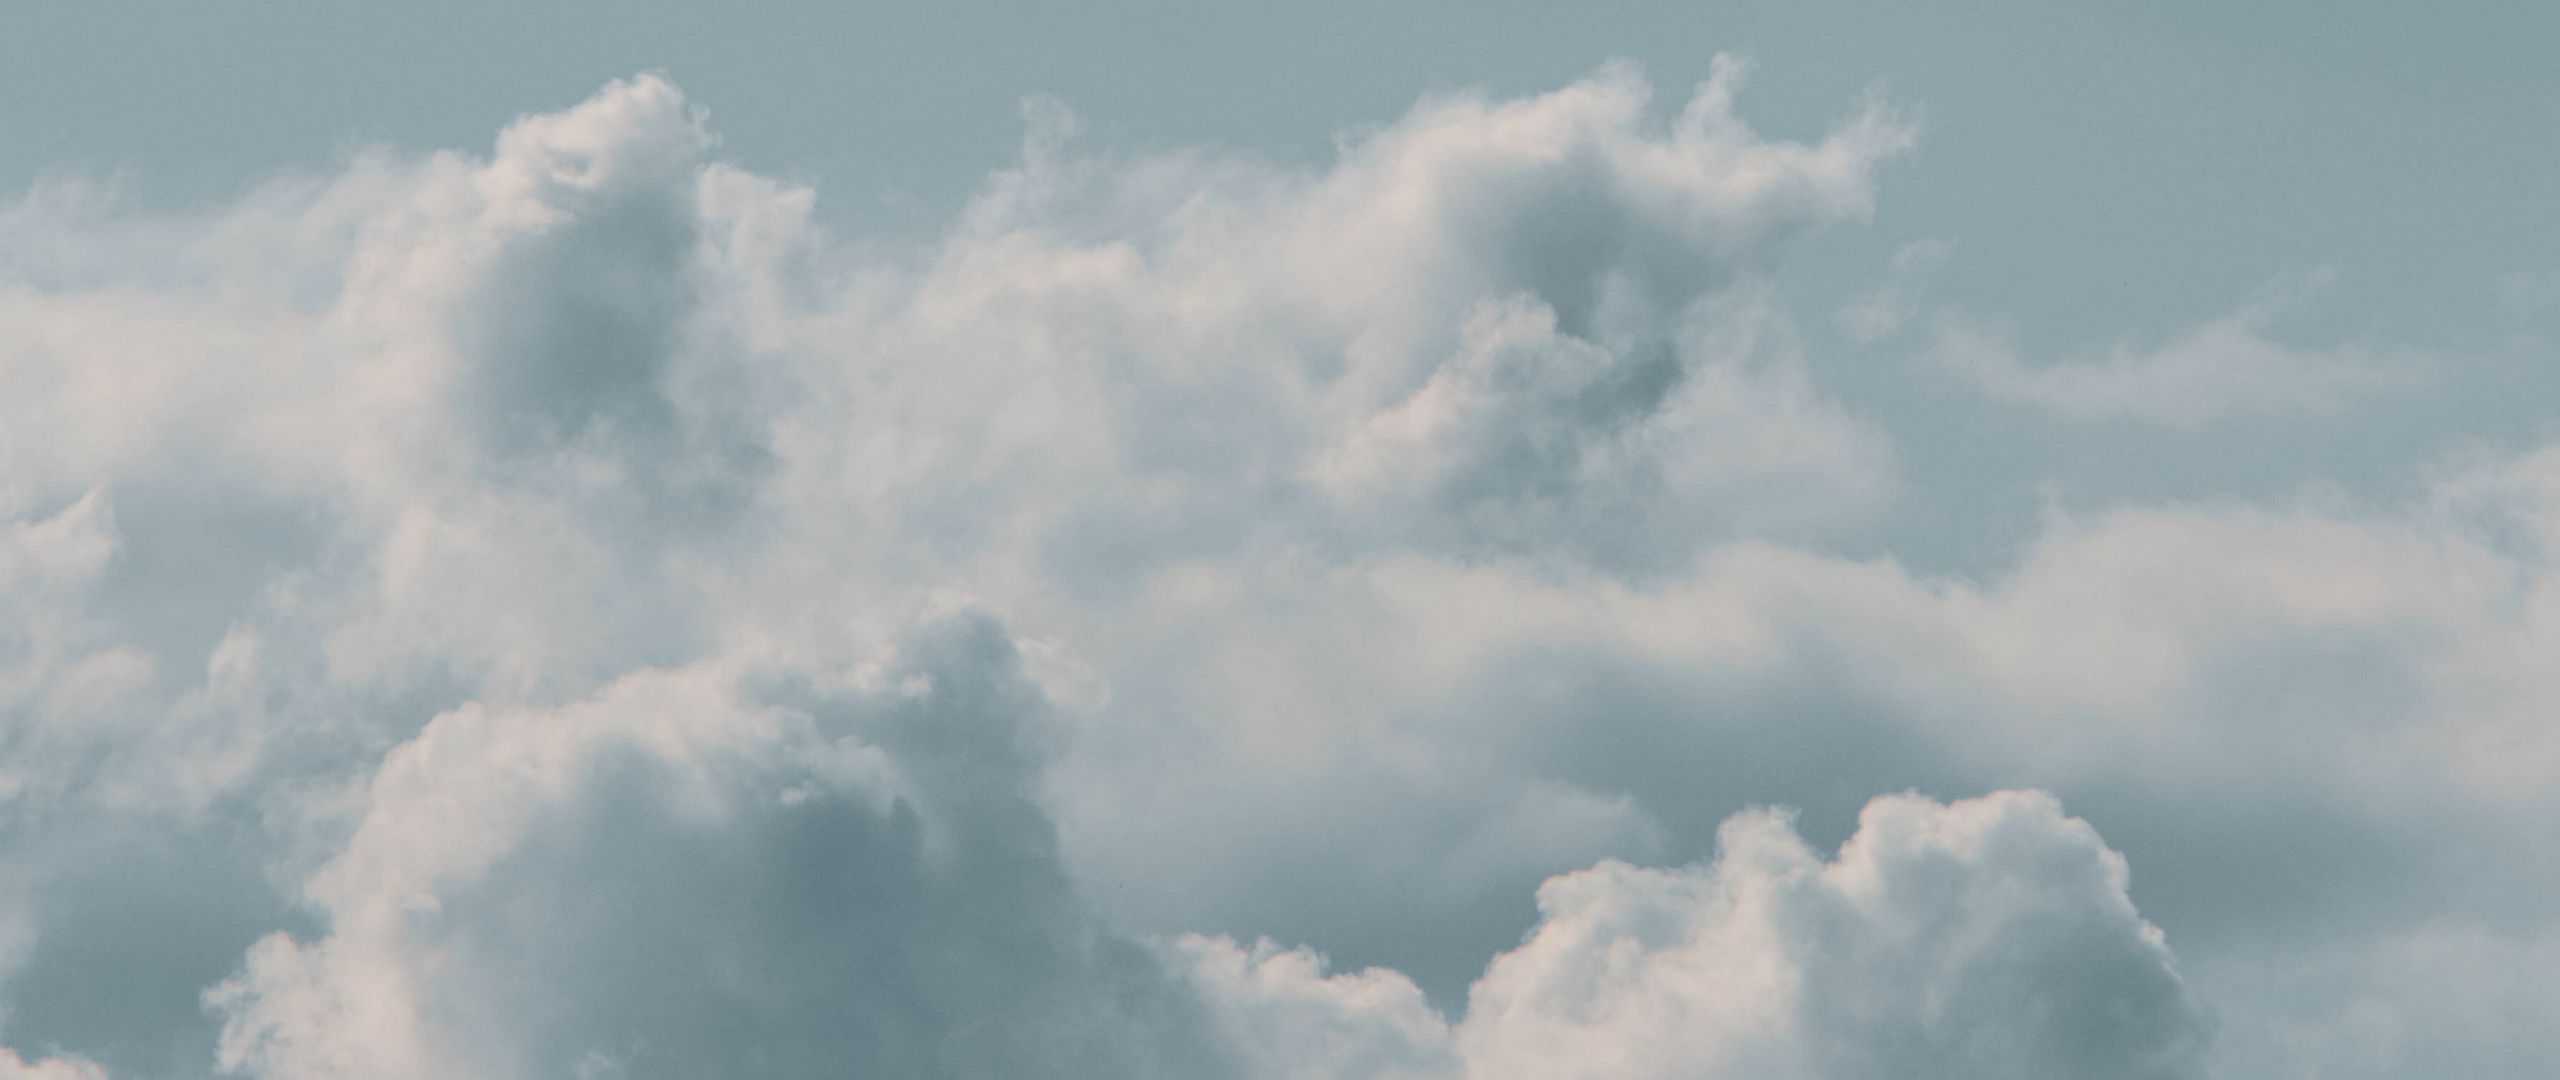 Download wallpaper 2560x1080 clouds, porous, gray, sky dual wide 1080p HD background